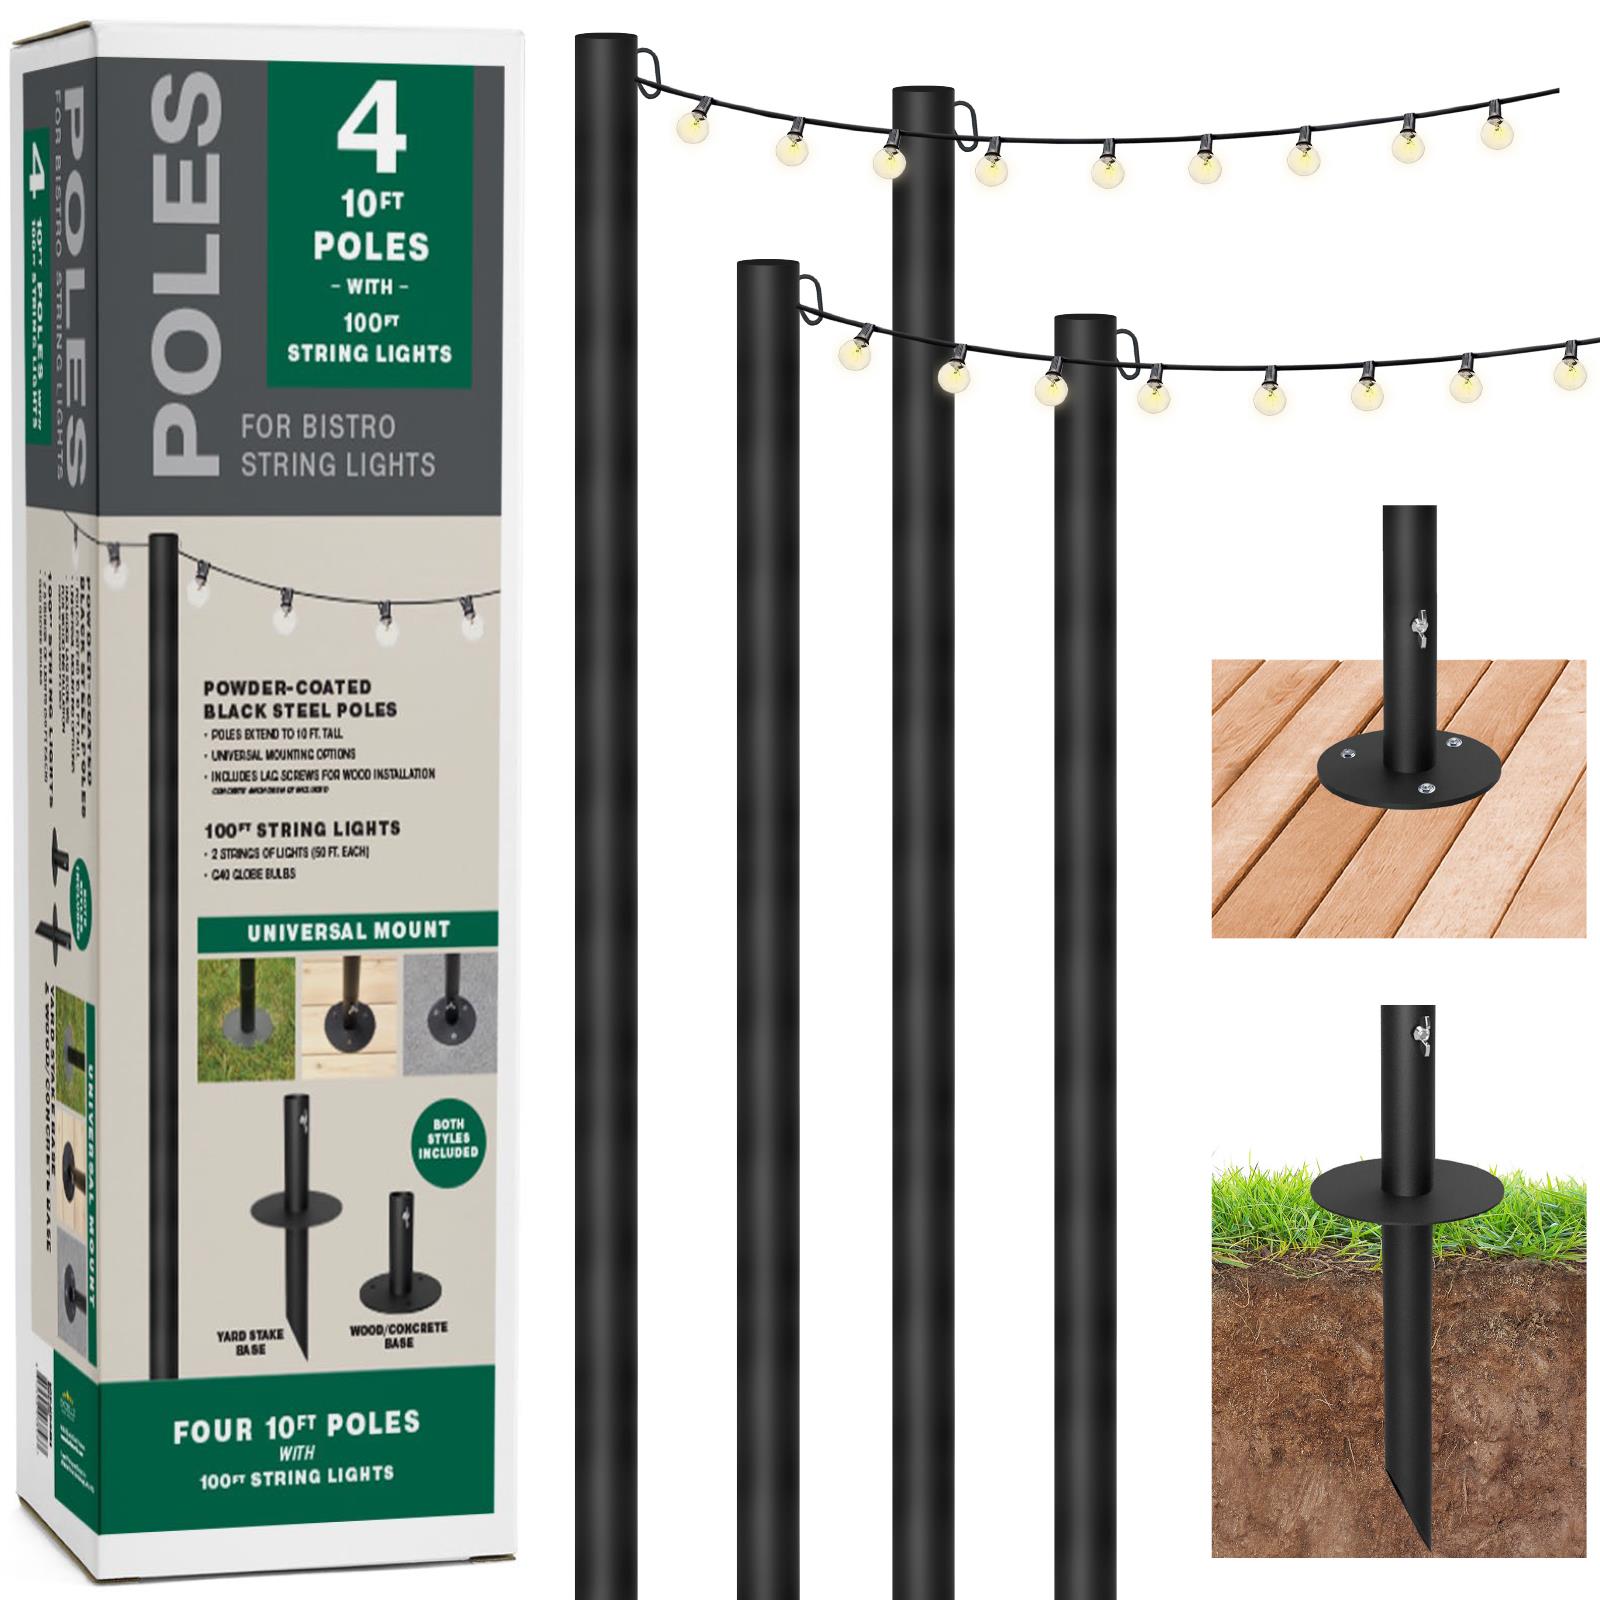 GLOBAL PRODUCTS Bistro 10' String Light Poles (4-pack) with 100' String Lights Included in the Lighting Accessories department at Lowes.com